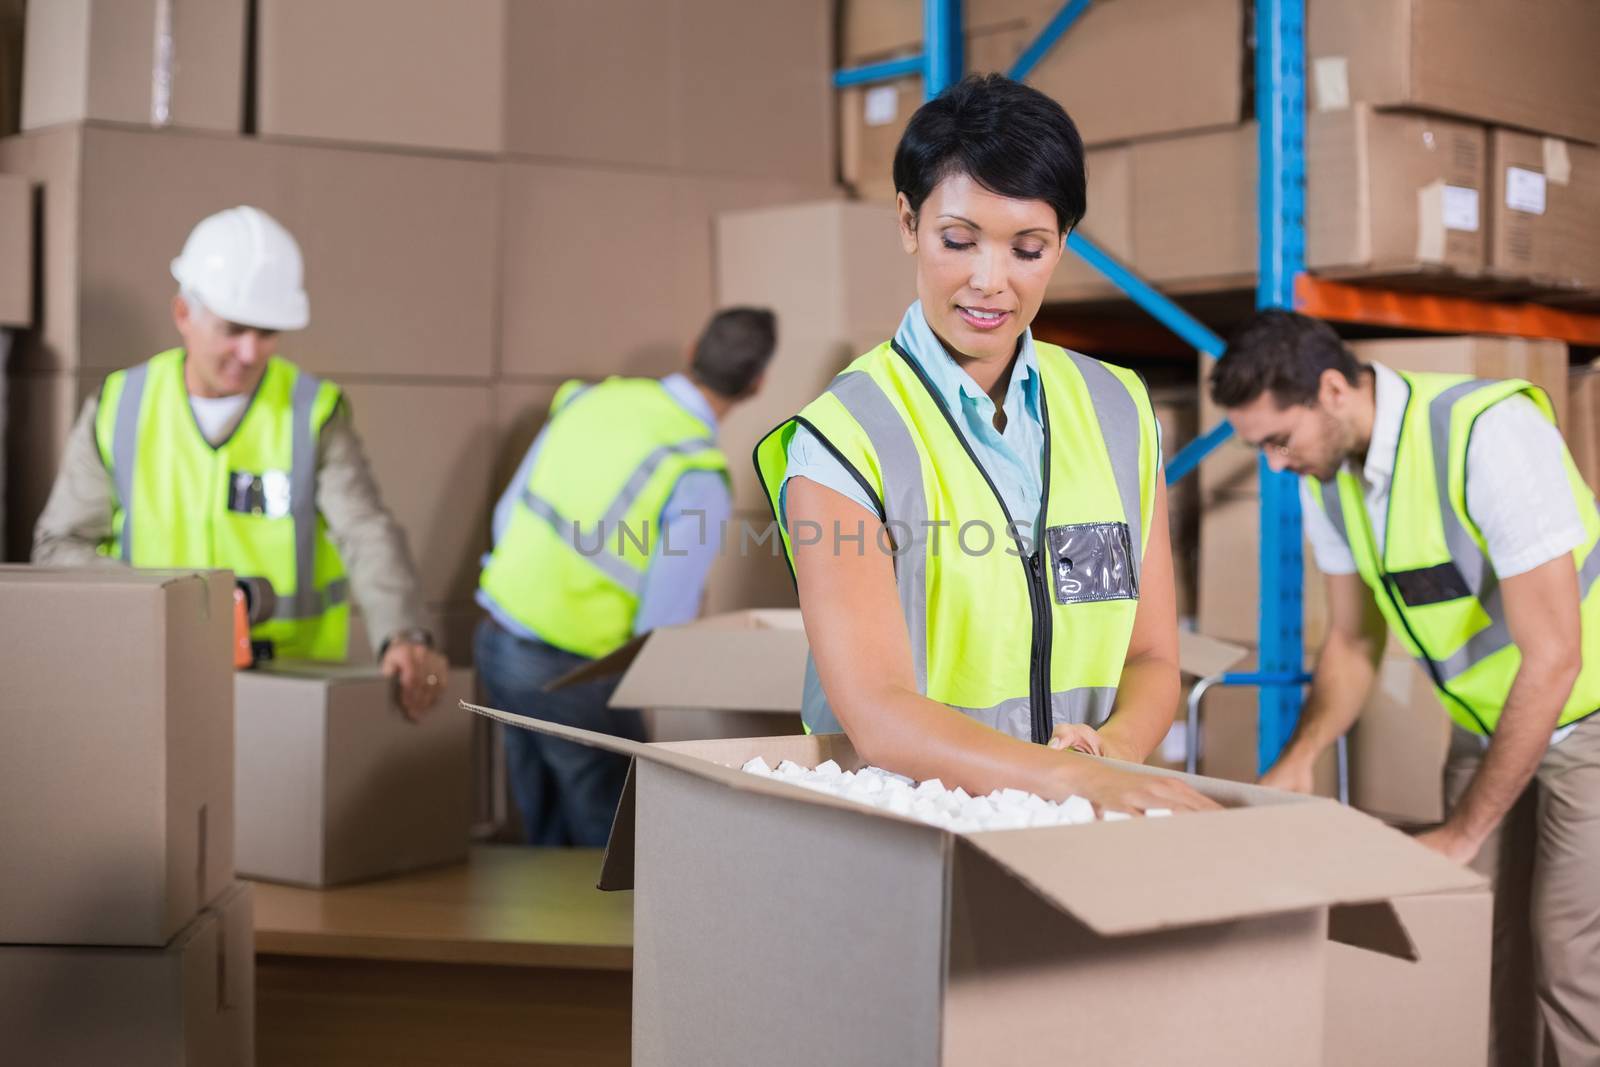 Warehouse workers in yellow vests preparing a shipment in a large warehouse